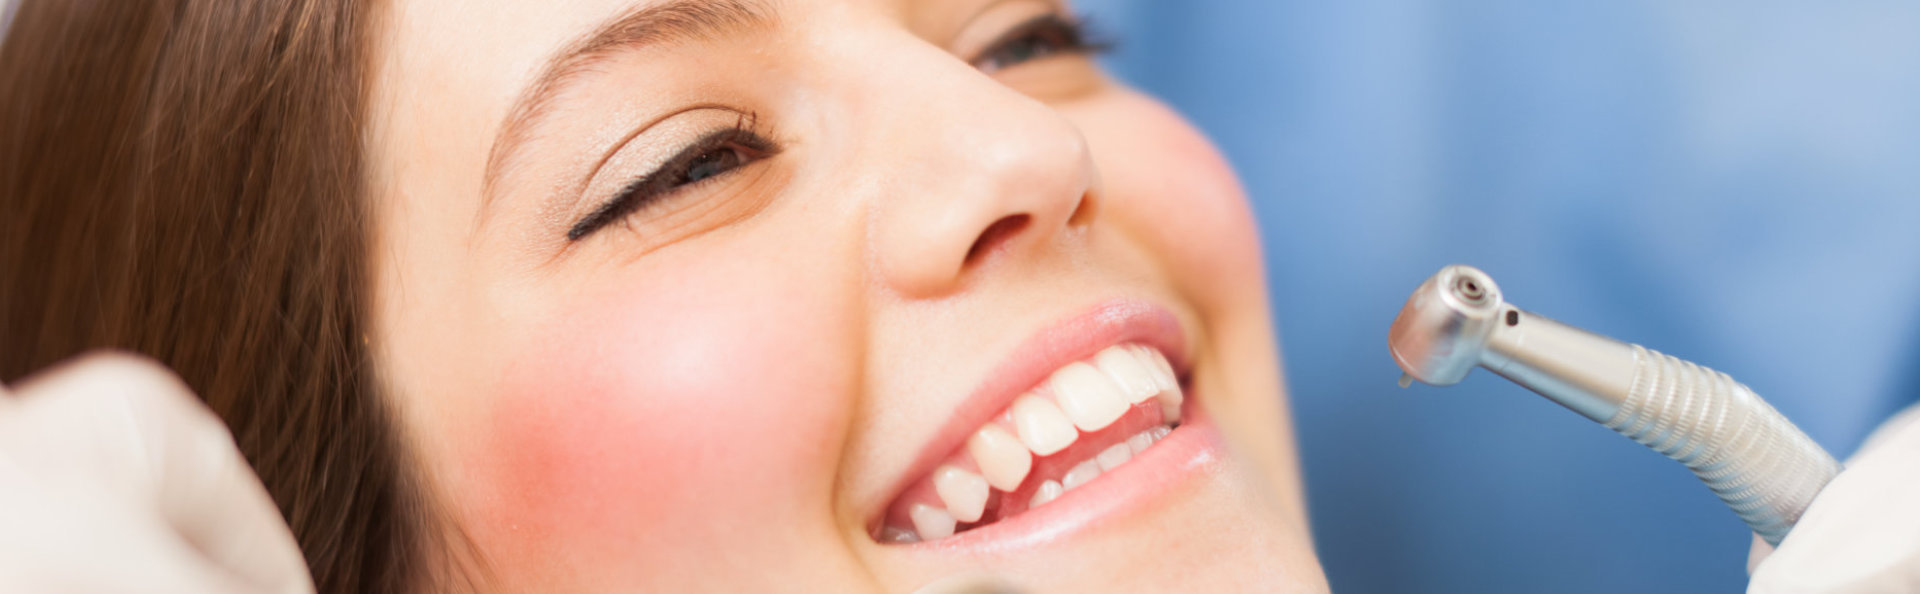 A beautiful woman is smiling after general & preventative dentistry